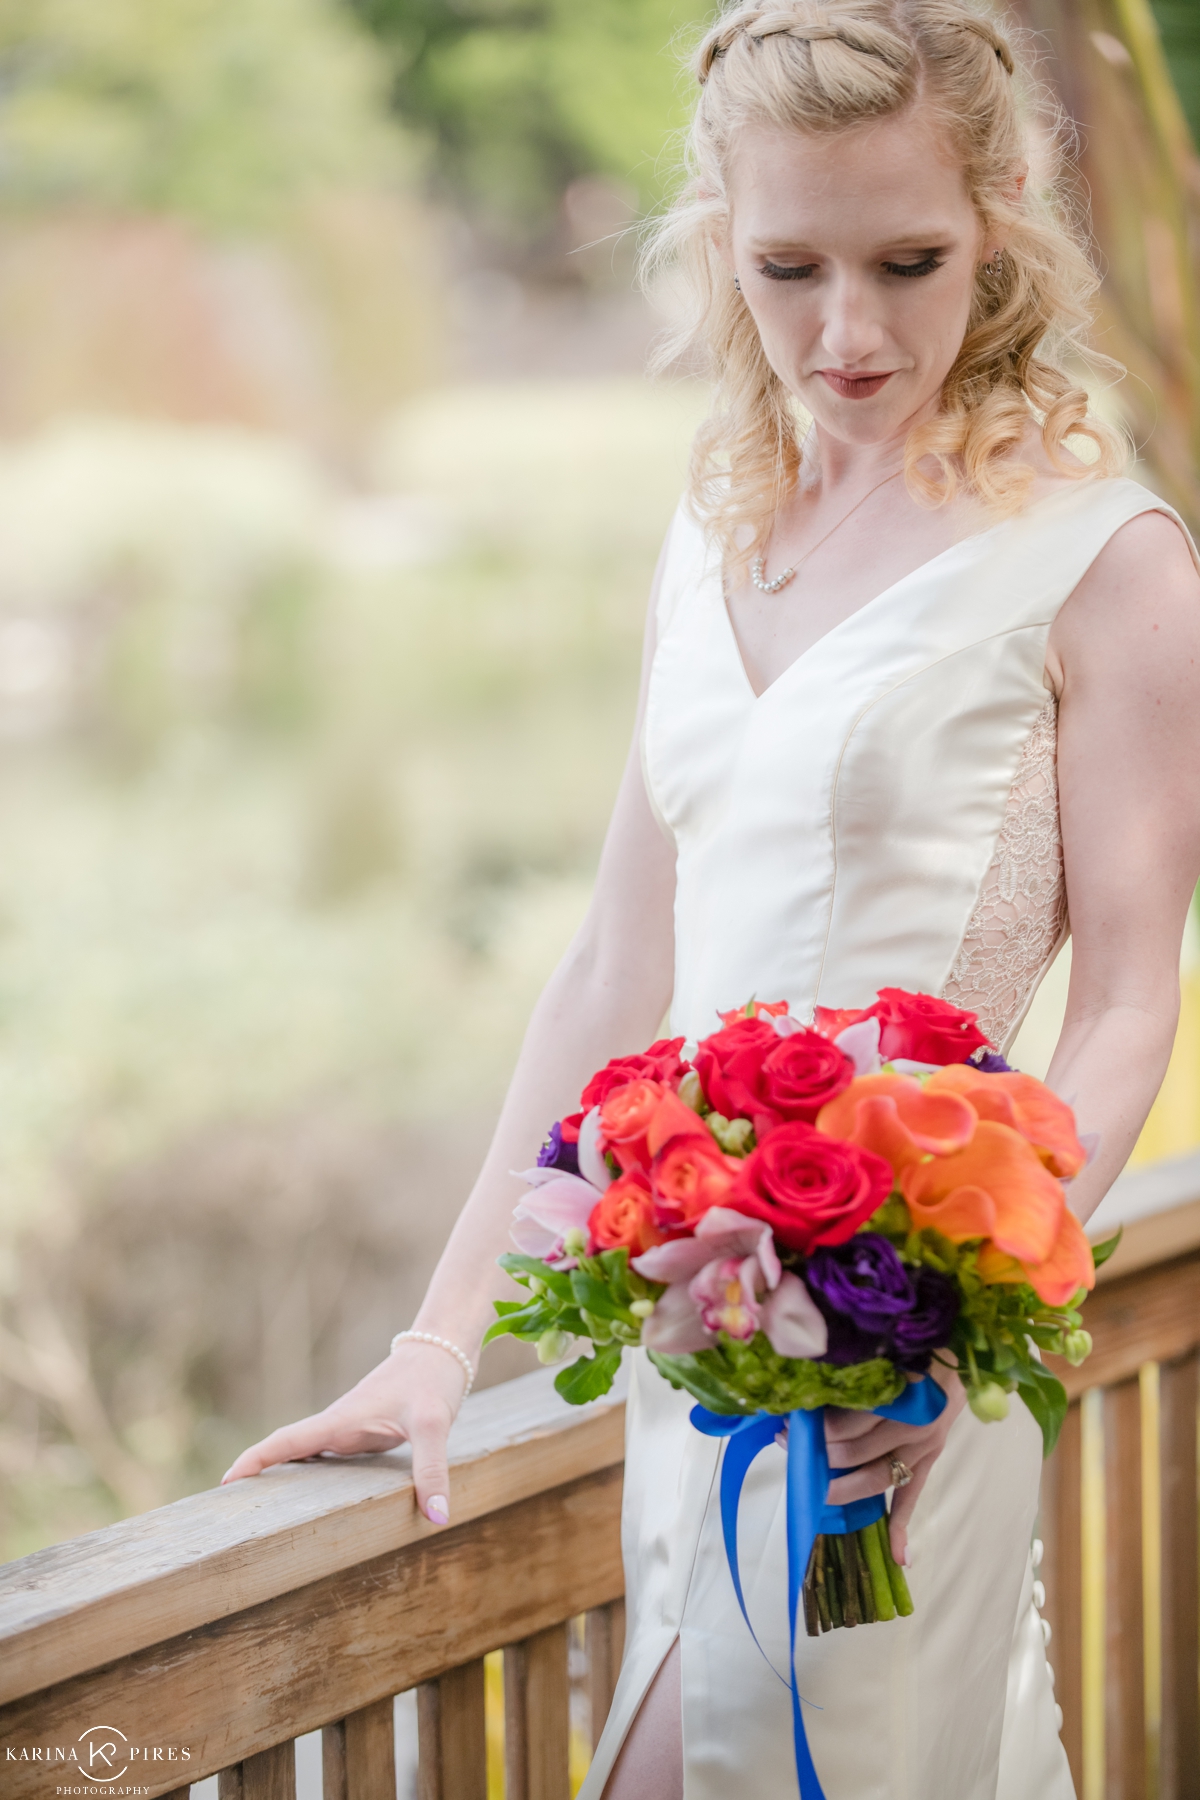 Bride holding a bright bouquet with colorful flowers